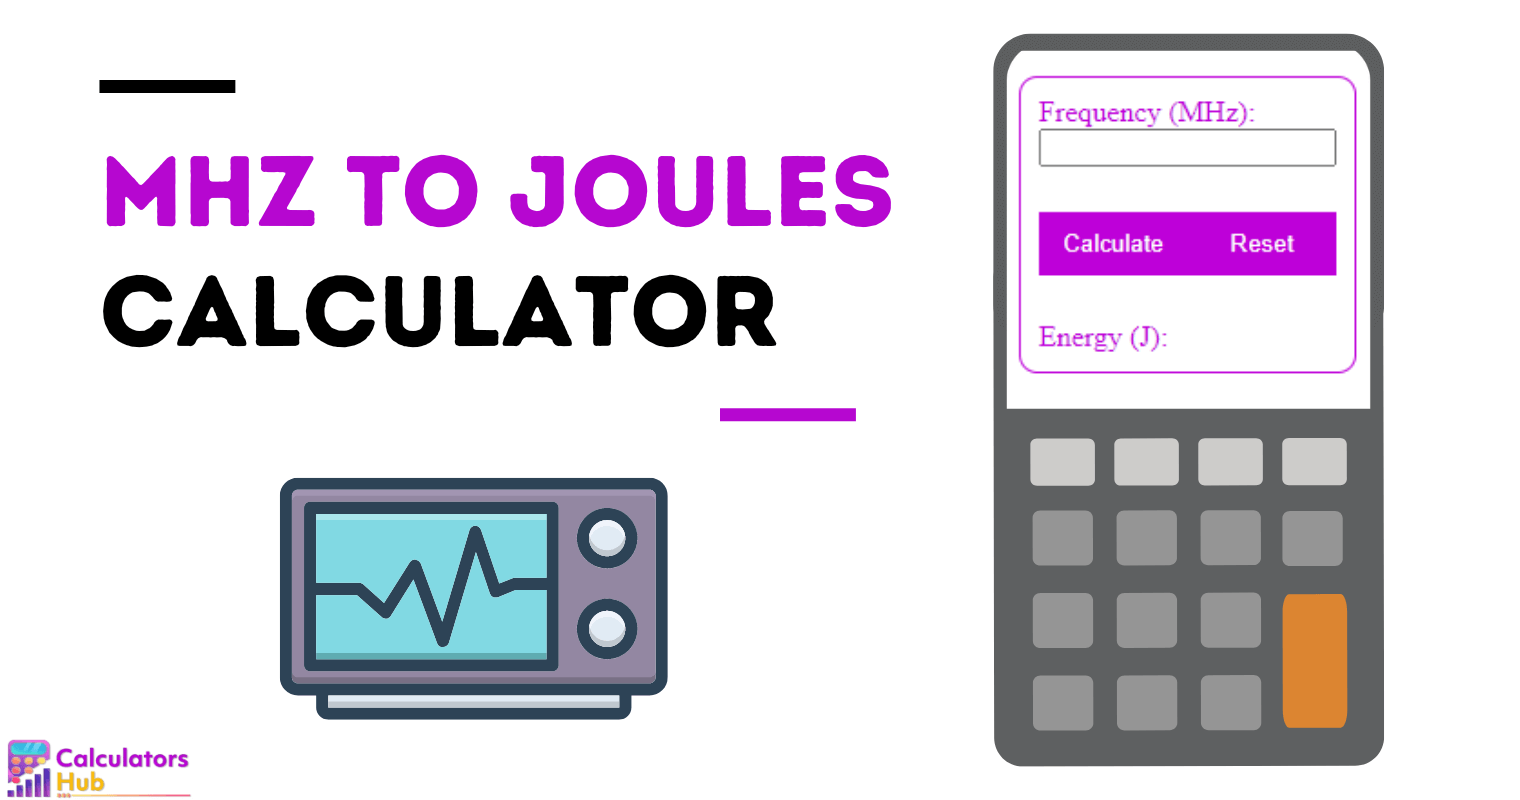 MHz to Joules Calculator